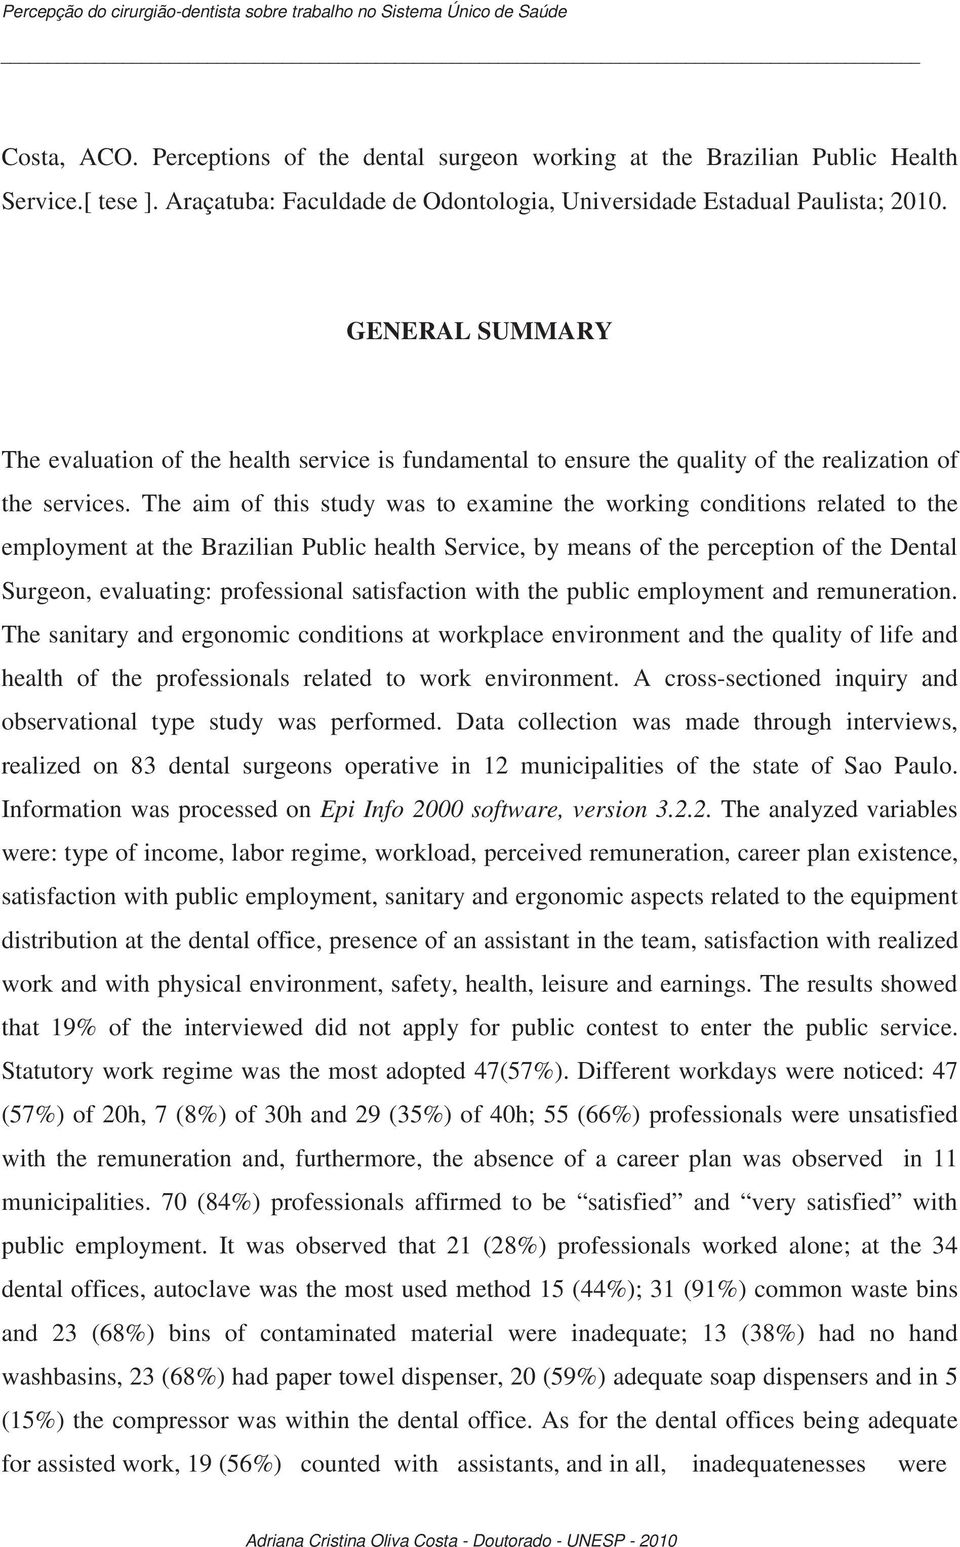 The aim of this study was to examine the working conditions related to the employment at the Brazilian Public health Service, by means of the perception of the Dental Surgeon, evaluating: